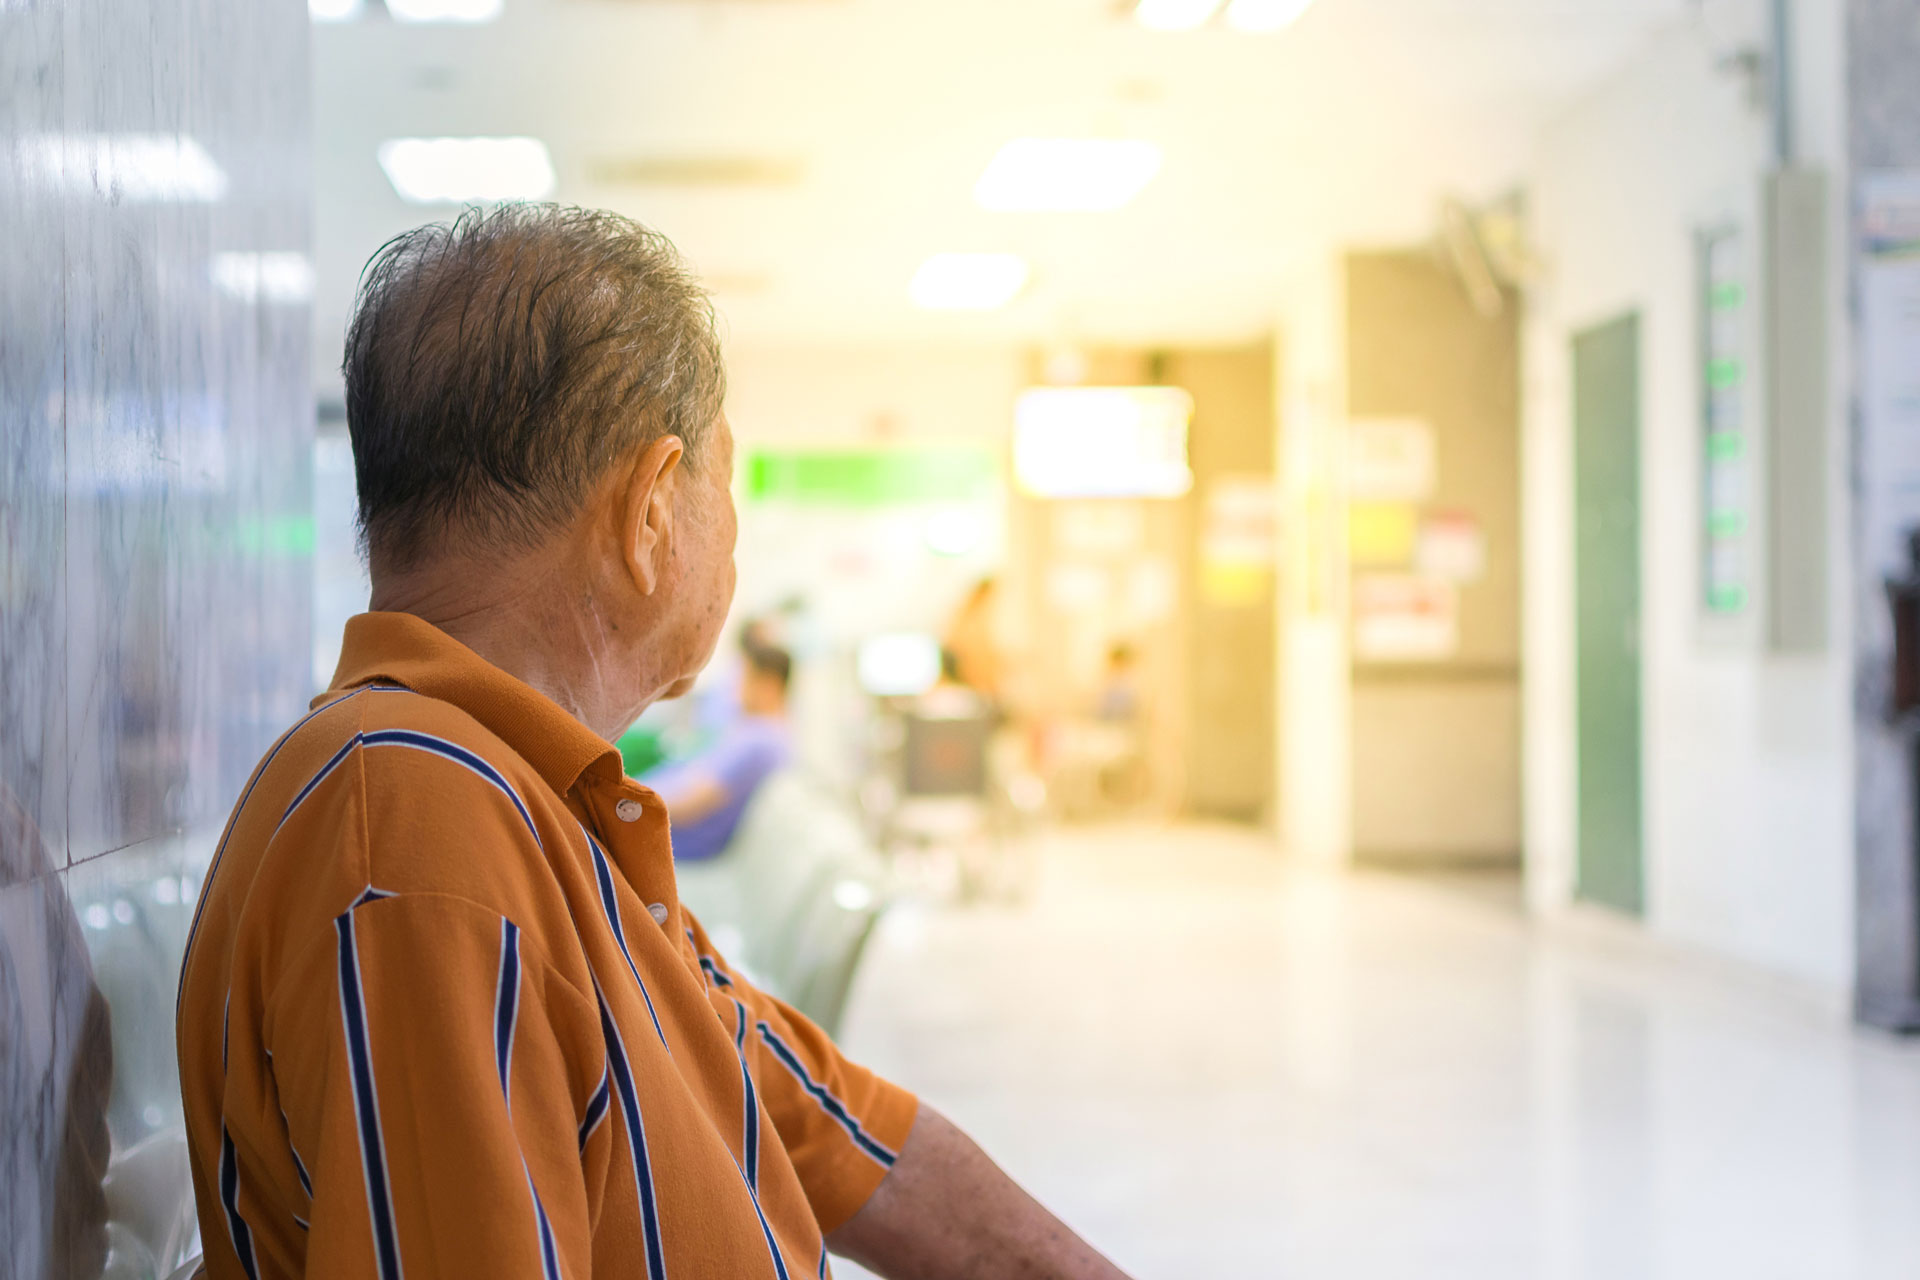 Patient sits in hospital awaiting appointment